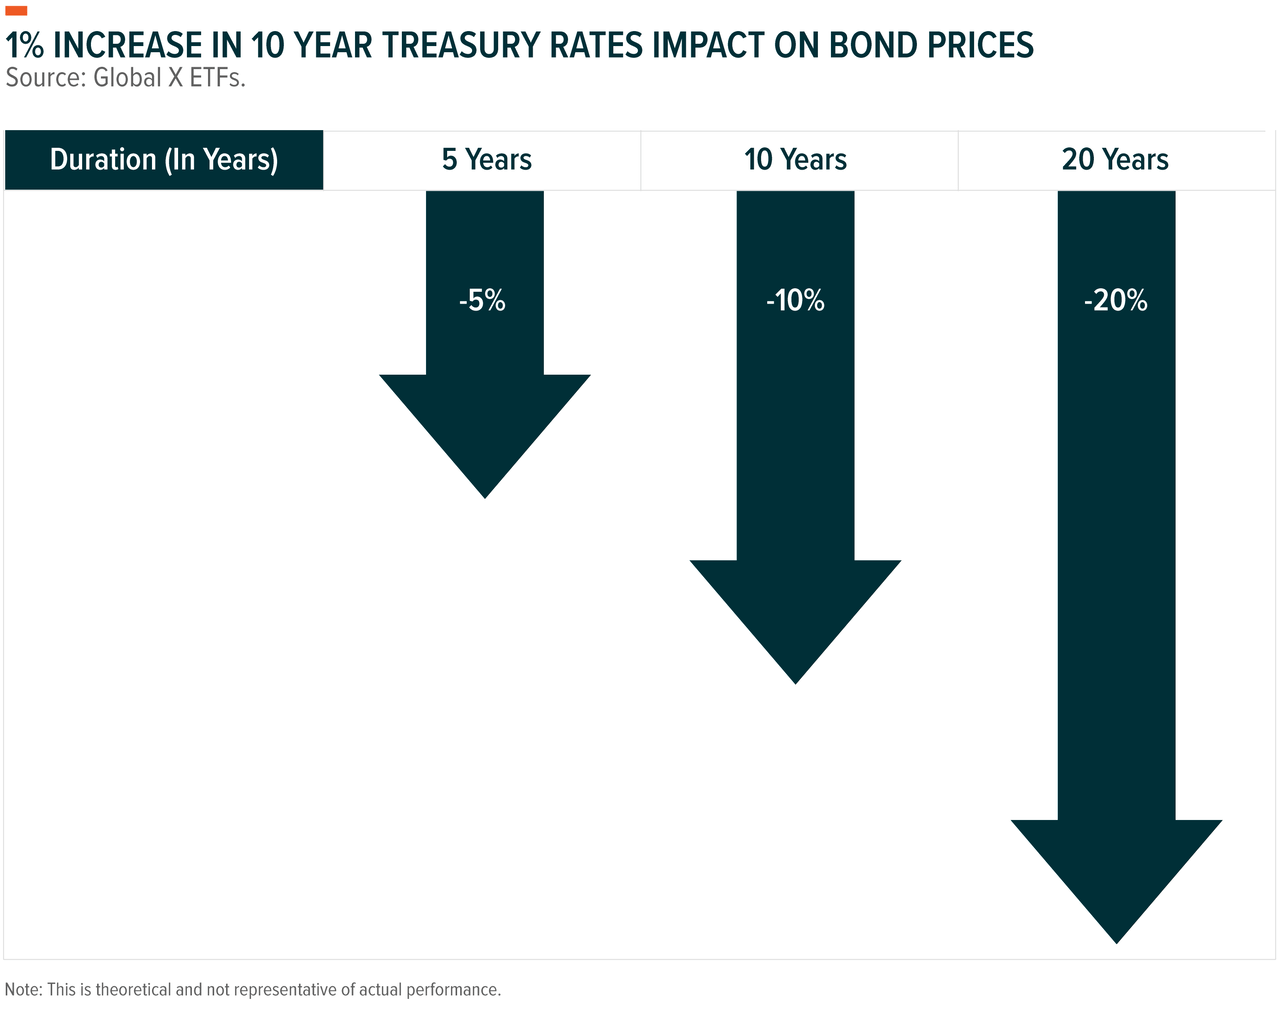 1% increase in 10 year treasury rates impact on bond prices